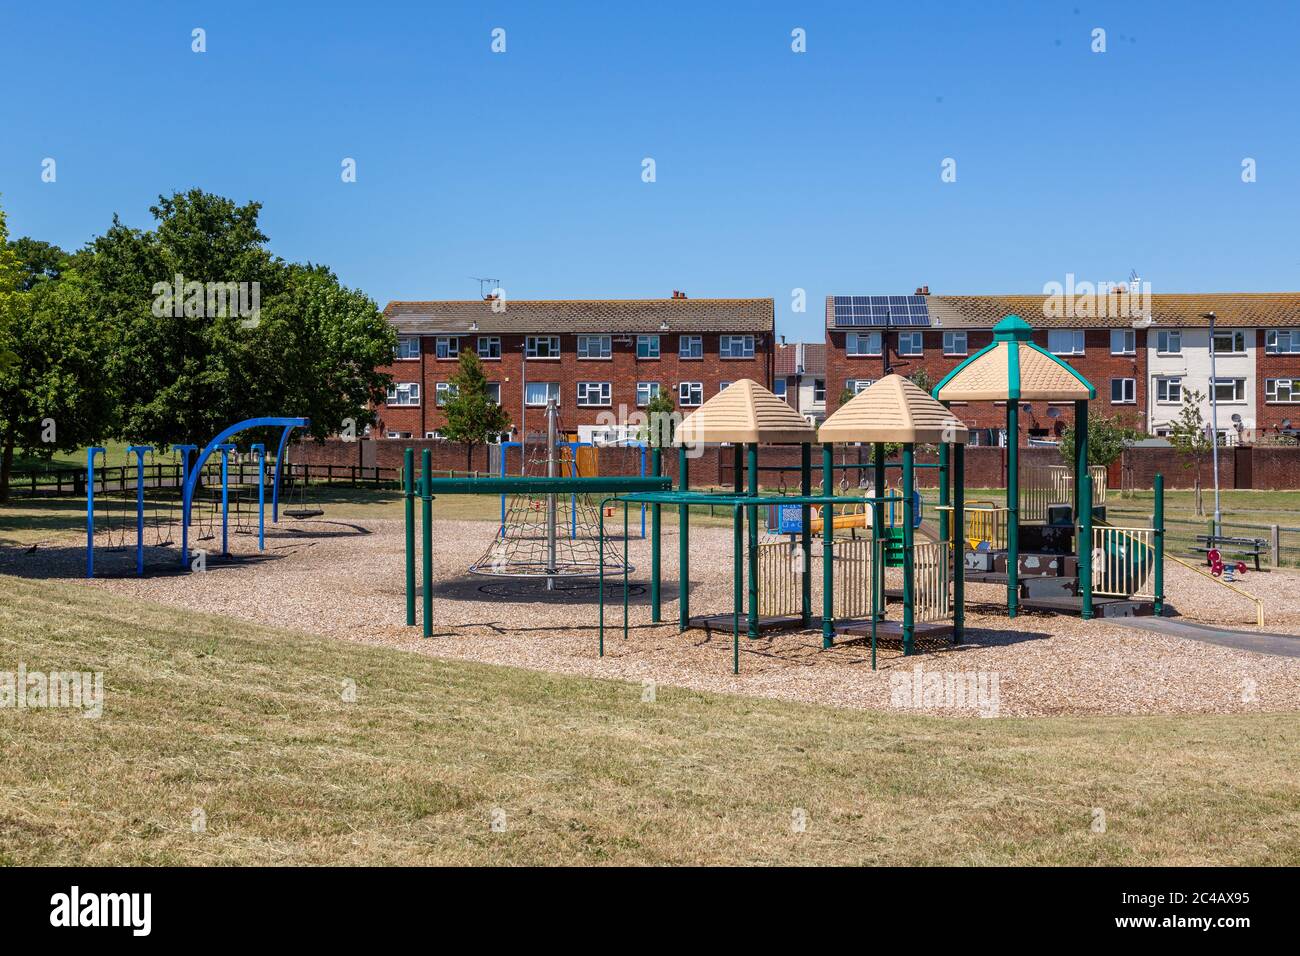 a child's playground or park empty on a summers day during Covid-19 lockdown Stock Photo